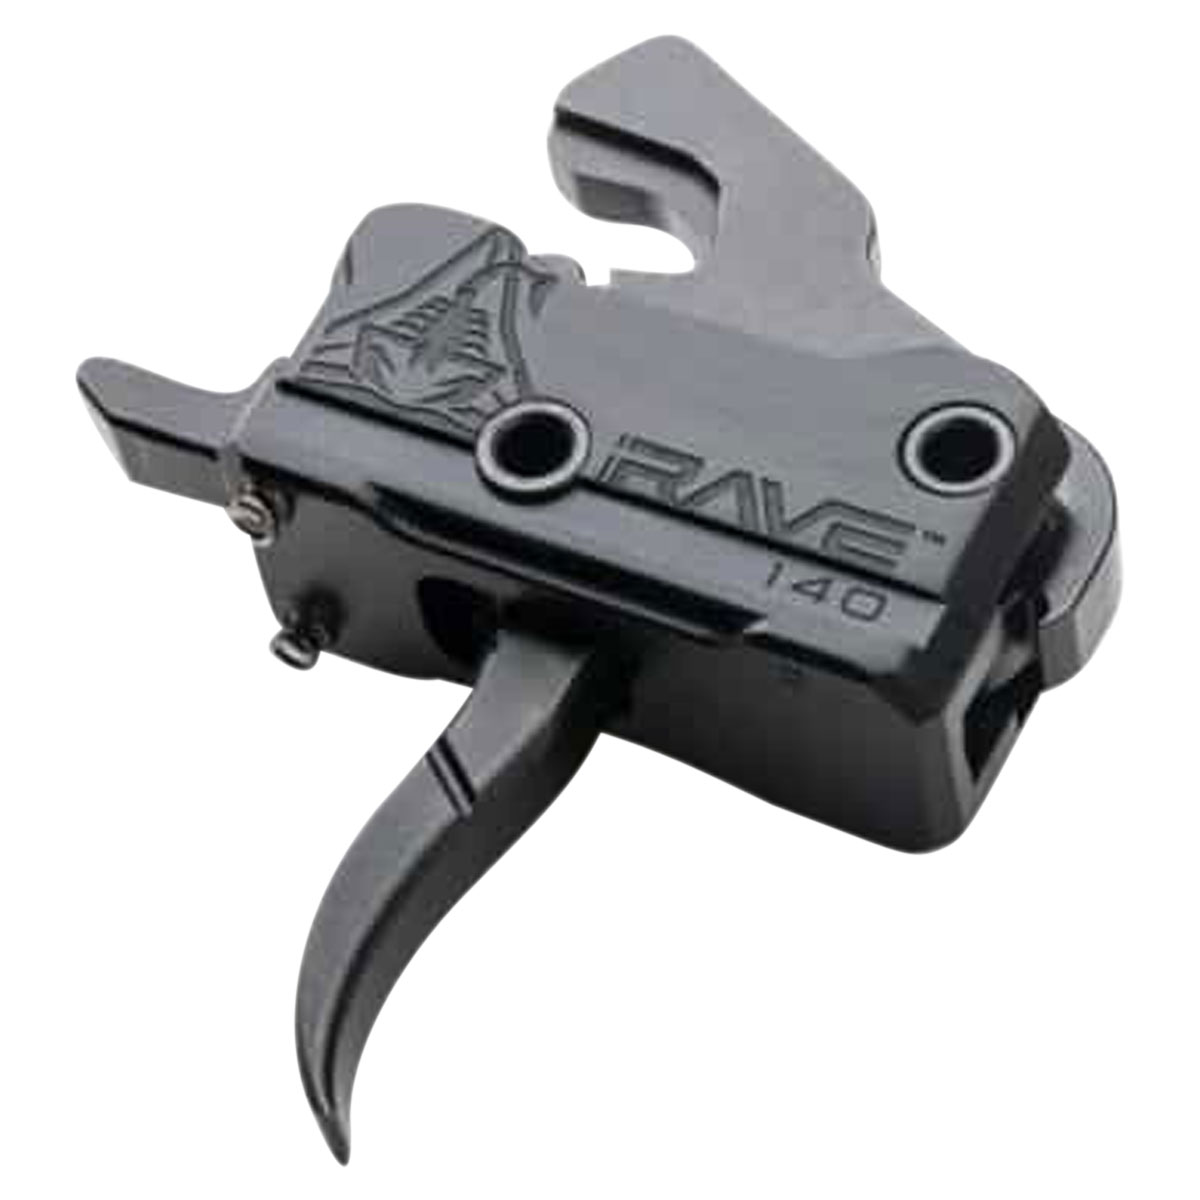 RISE ARMAMENT - AR-15 RAVE 140 TRIGGER & EXTENDED LATCH CHARGING HANDLE